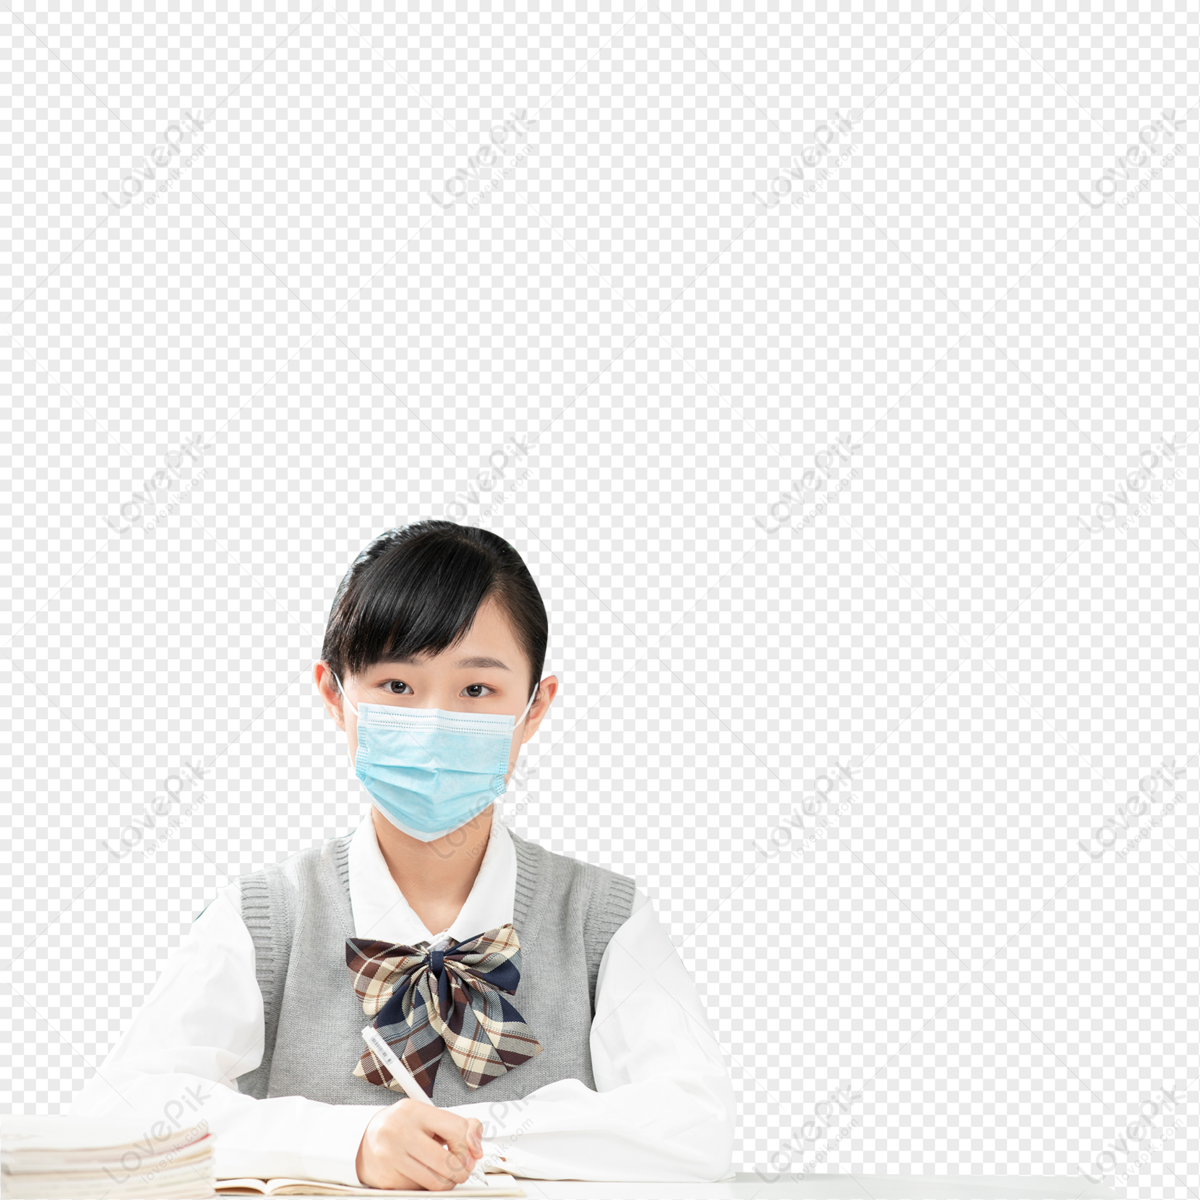 Middle school students wearing masks doing homework, student wear, school mask, and homework png picture